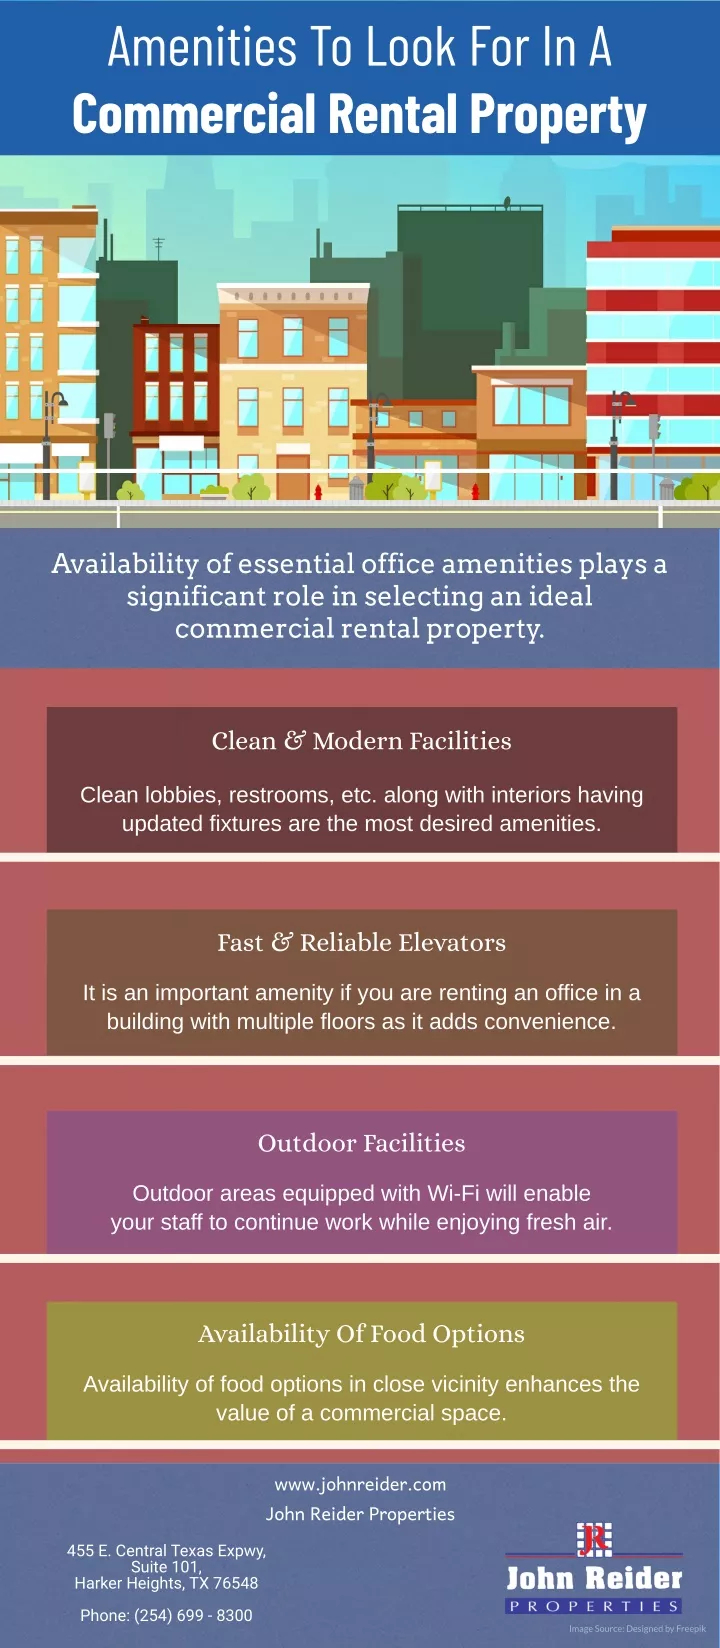 amenities to look for in a commercial rental